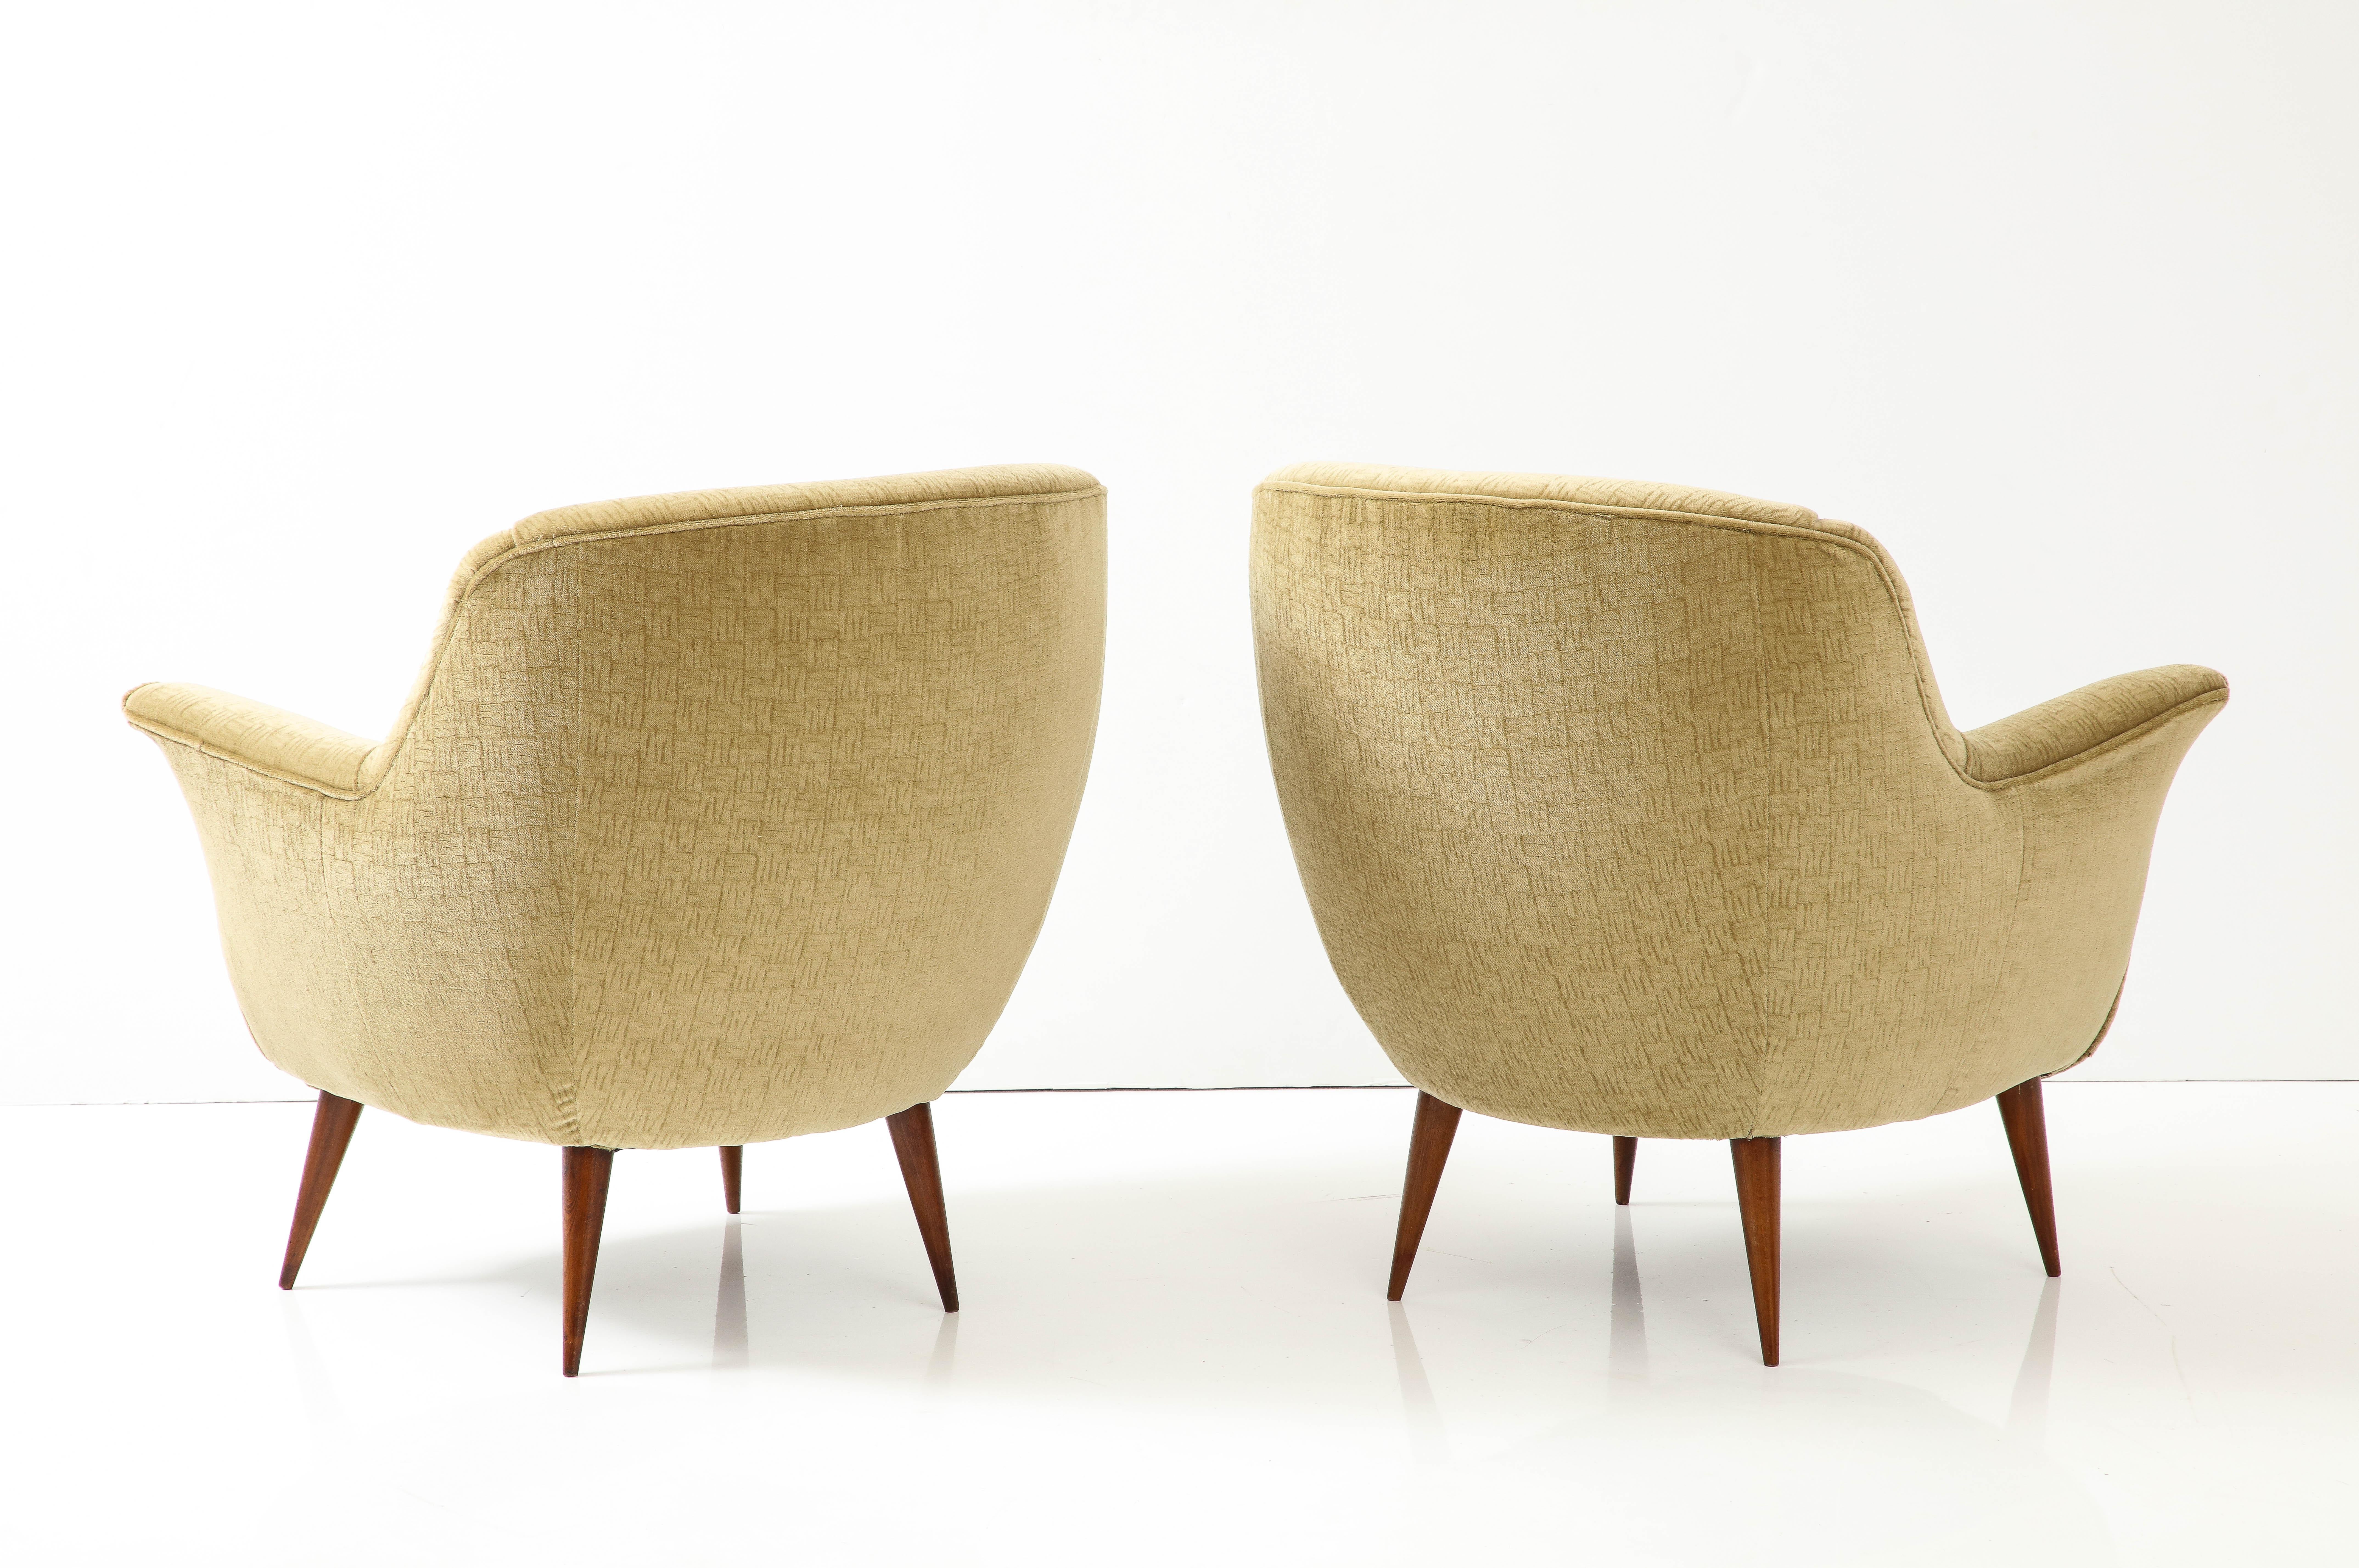 1950's Modernist Gio Ponti Style Italian Lounge Chairs In Mohair Polsterung im Angebot 6